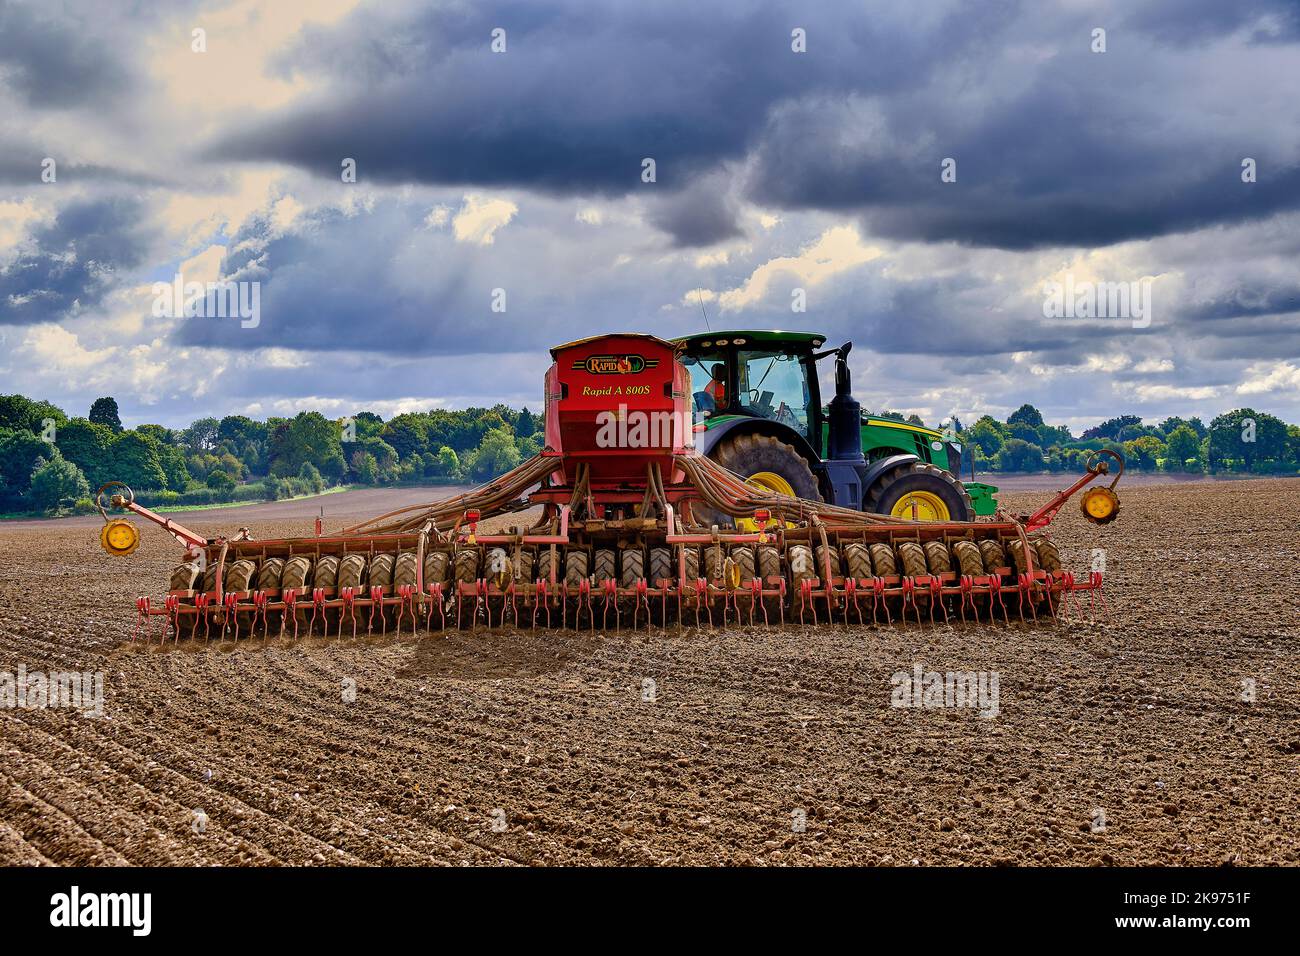 Seed drilling on agricultural farm Stock Photo